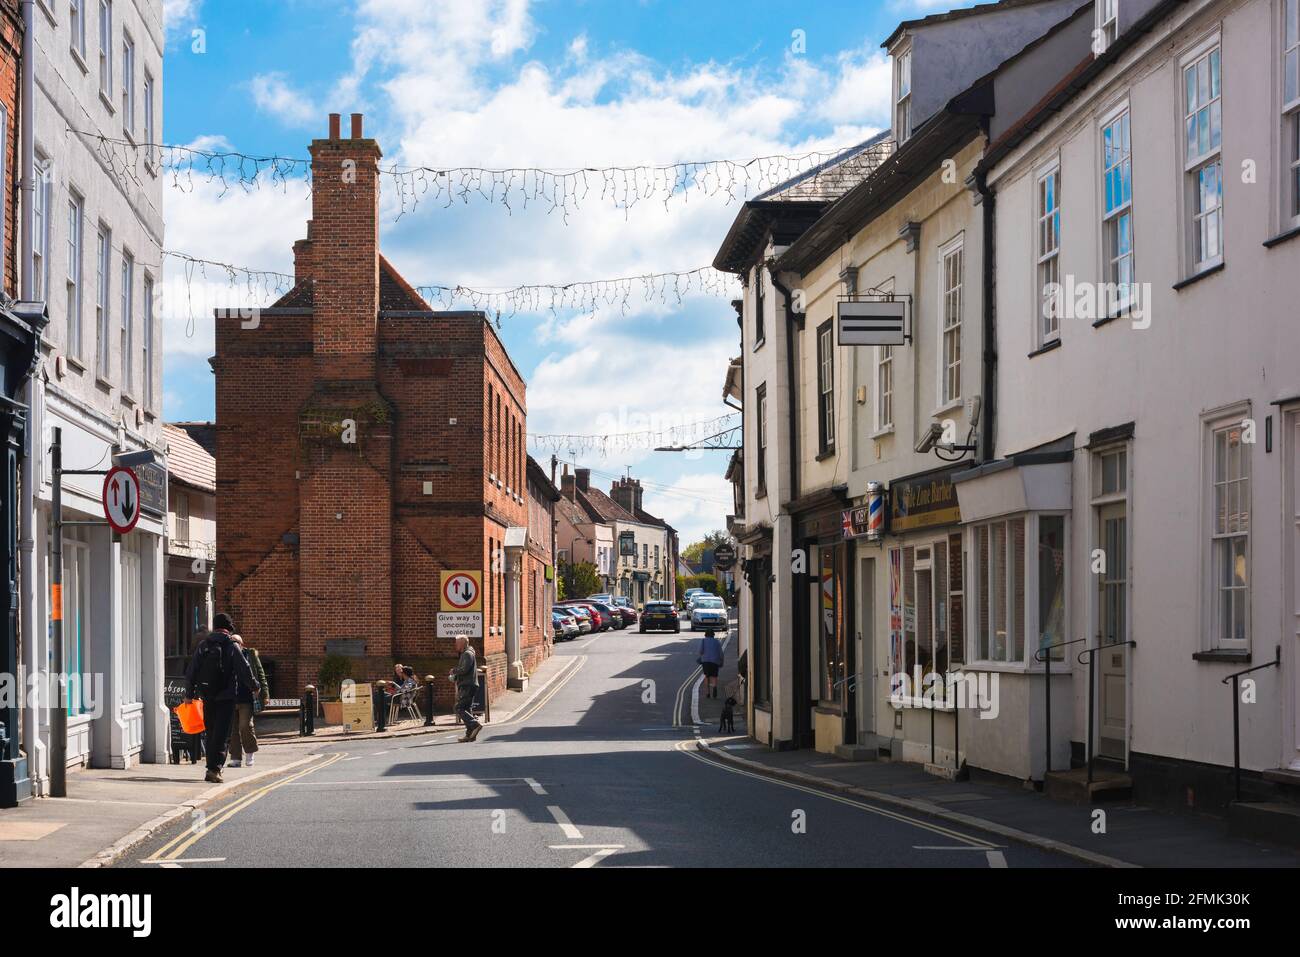 Manningtree Essex town, view of Manningtree High Street looking towards the eastern end of the town, Essex, England, UK Stock Photo